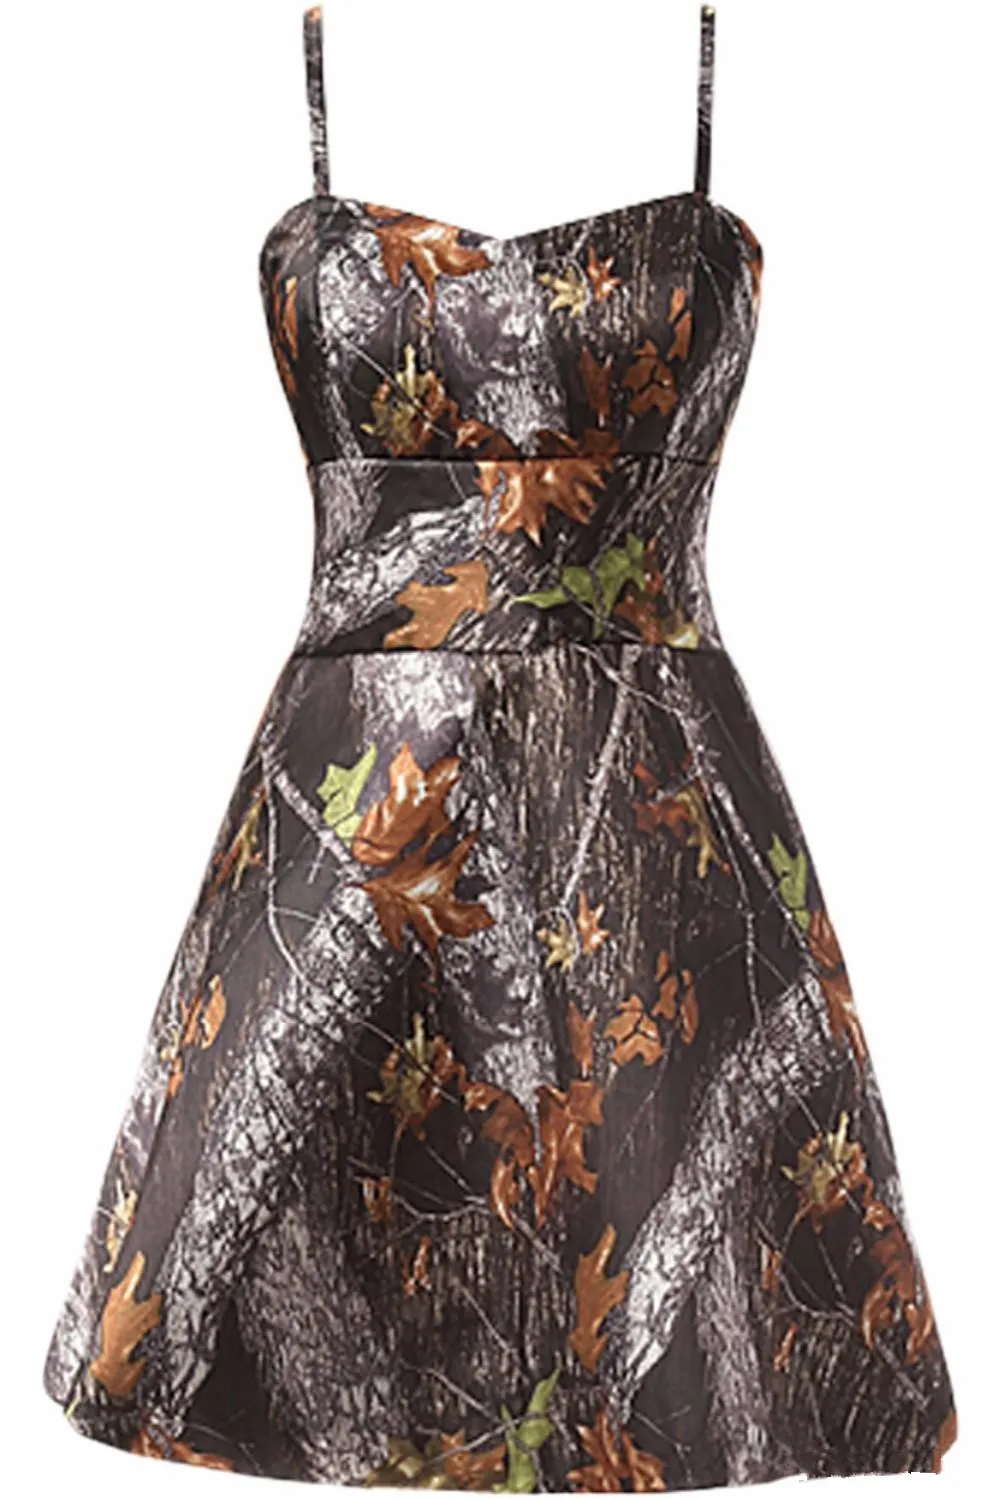 2017 New Sexy A Line Short Camo Prom Dresses Camouflage Homecoming Dresses Party Cocktail Gowns QA018